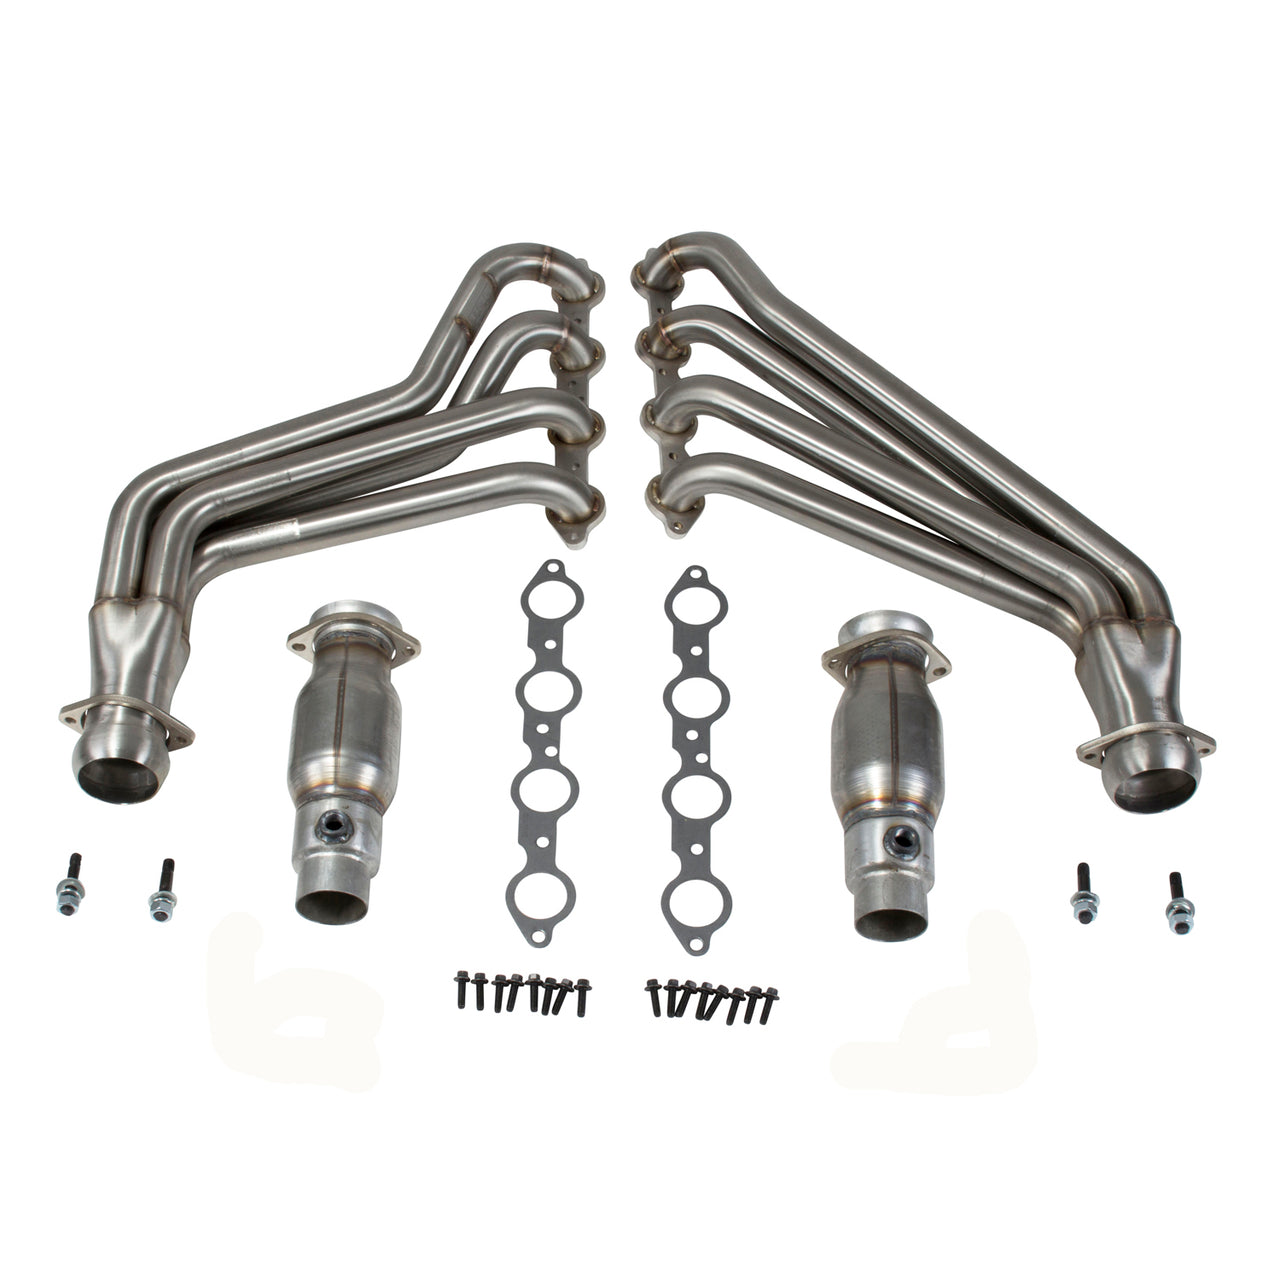 2010-2015 CAMARO LS3/L99 1-3/4 LONG TUBE HEADERS W/CATS SYSTEM (304 STAINLESS)